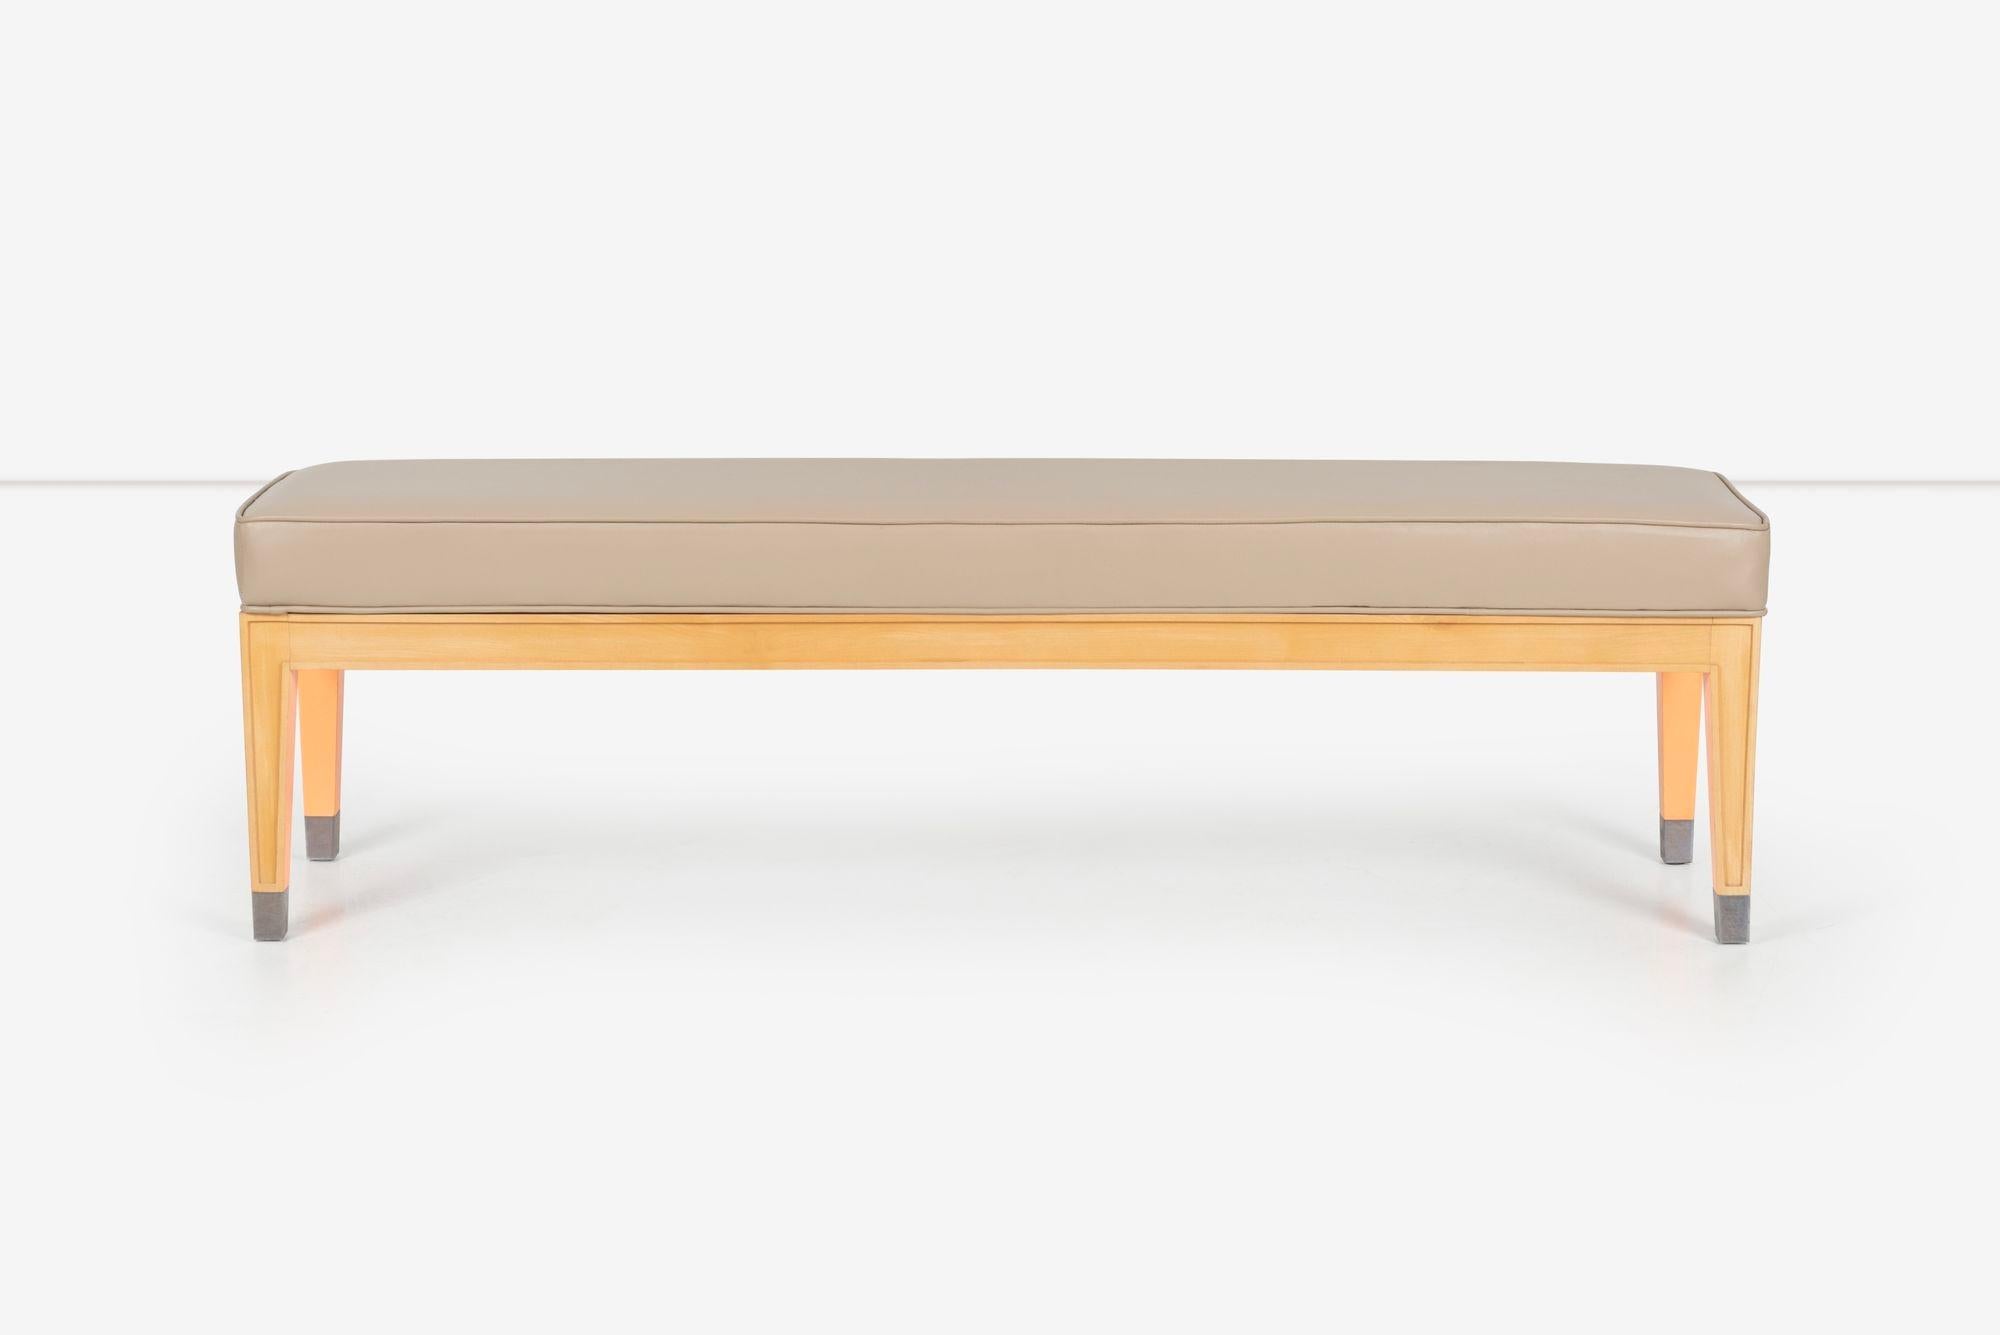 Post-Modern Phillipe Starck Bench from The Clift Hotel San Fransisco C.A. For Sale